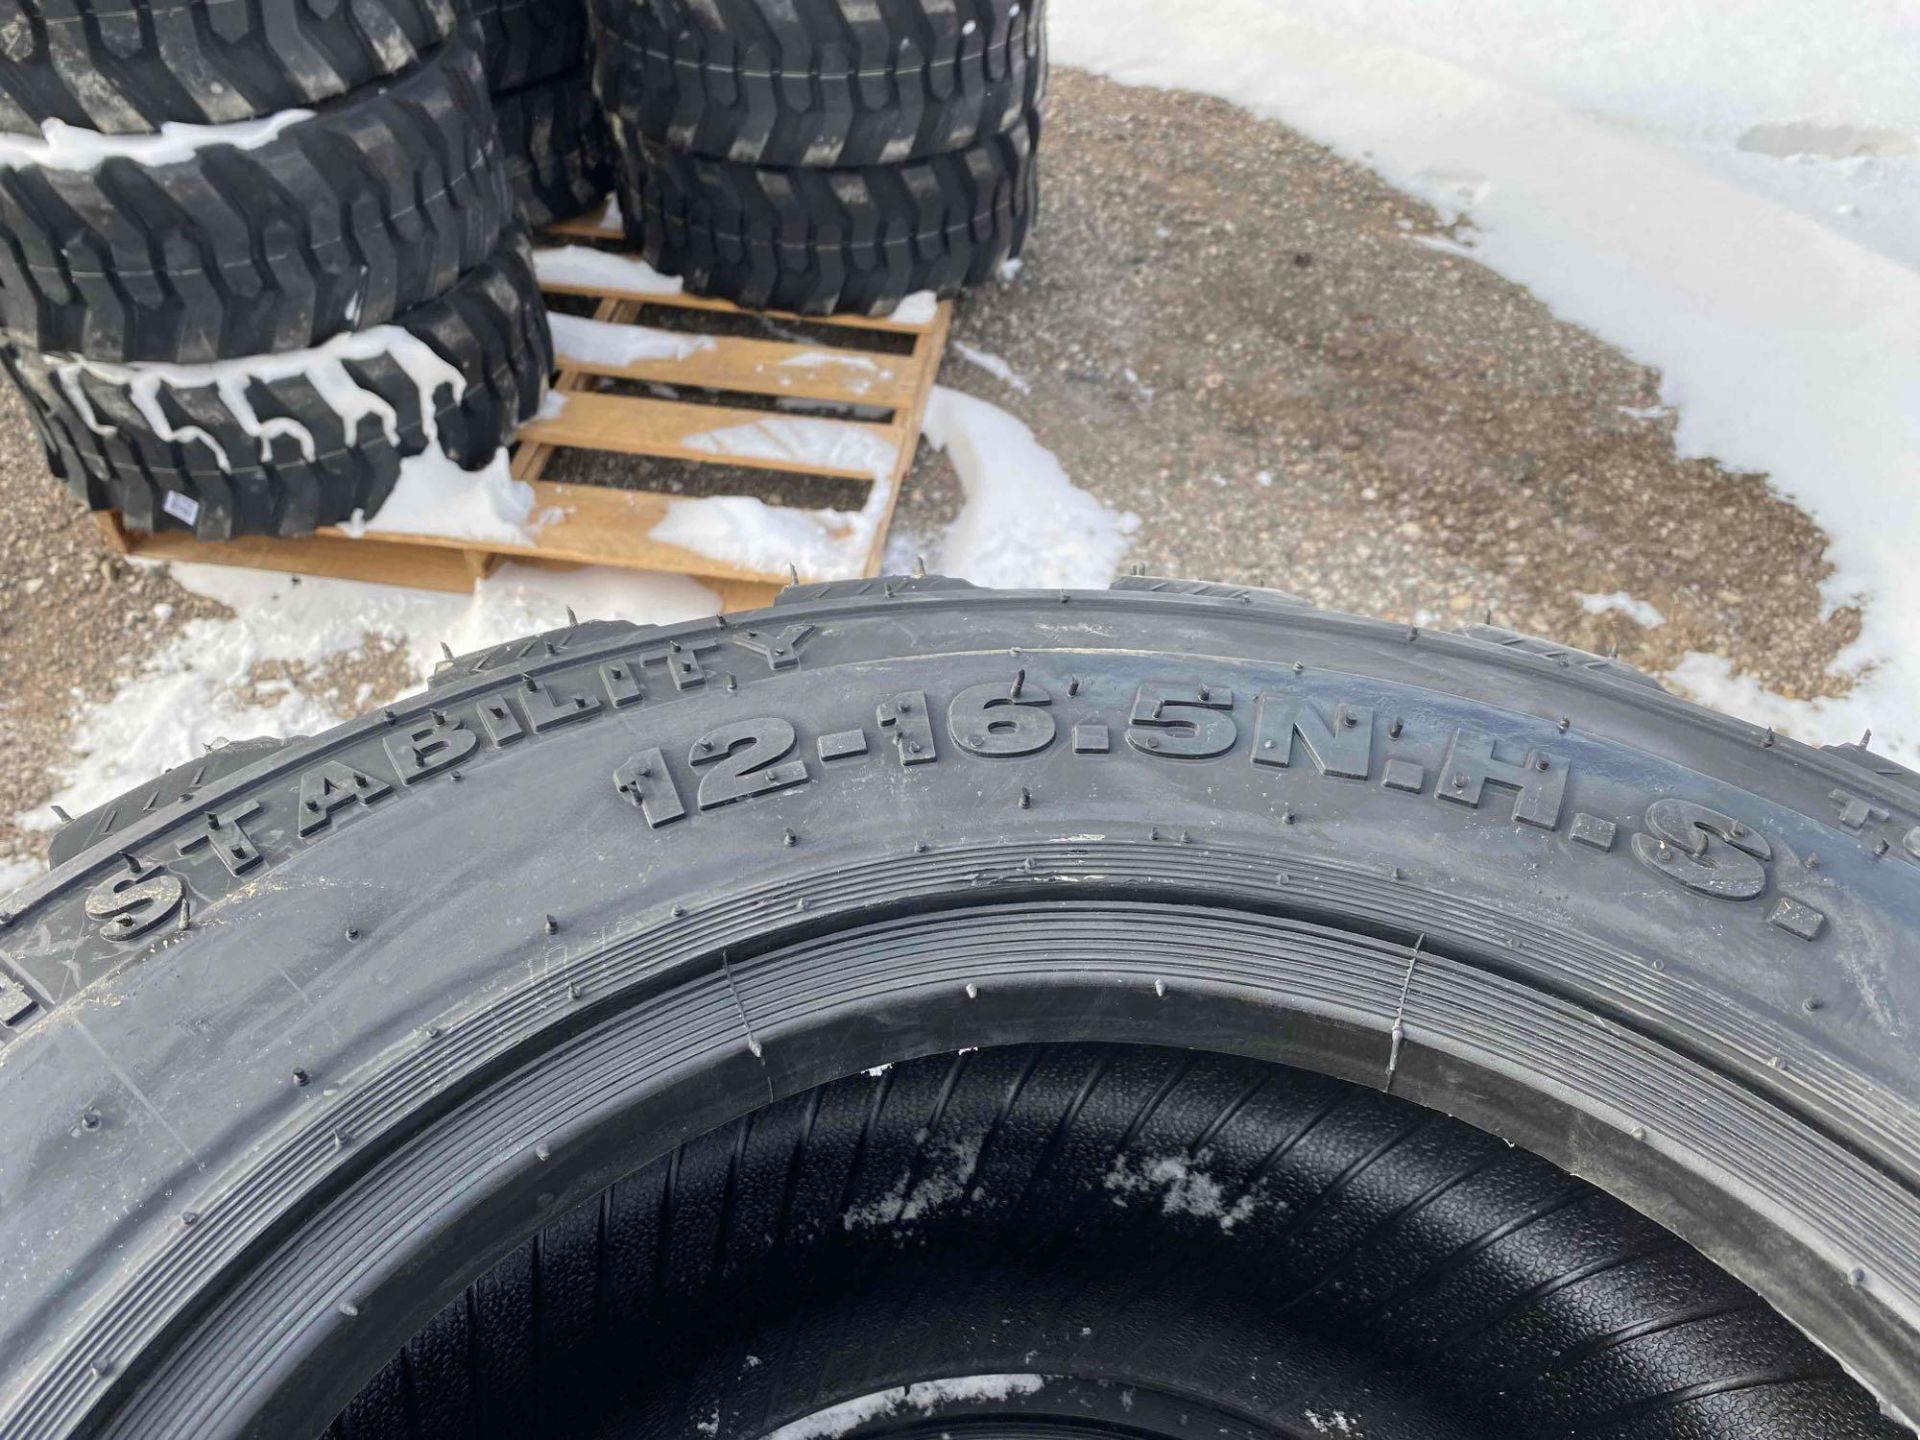 New Set of 4 Skid Loader Wheels and Tires* - Image 4 of 4